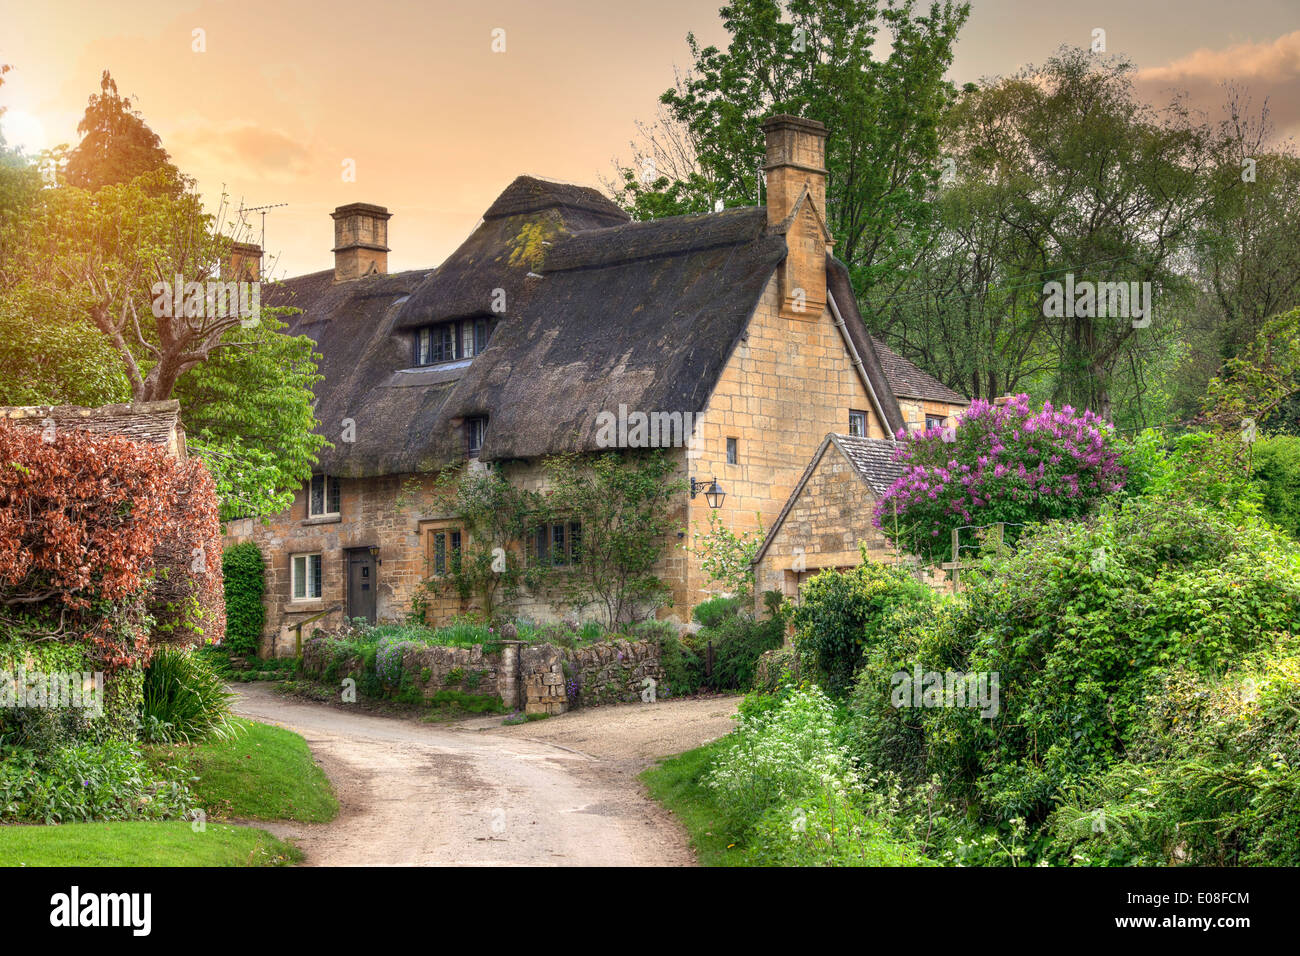 Pretty thatched Cotswold cottage in the village of Stanton, Gloucestershire, England. Stock Photo